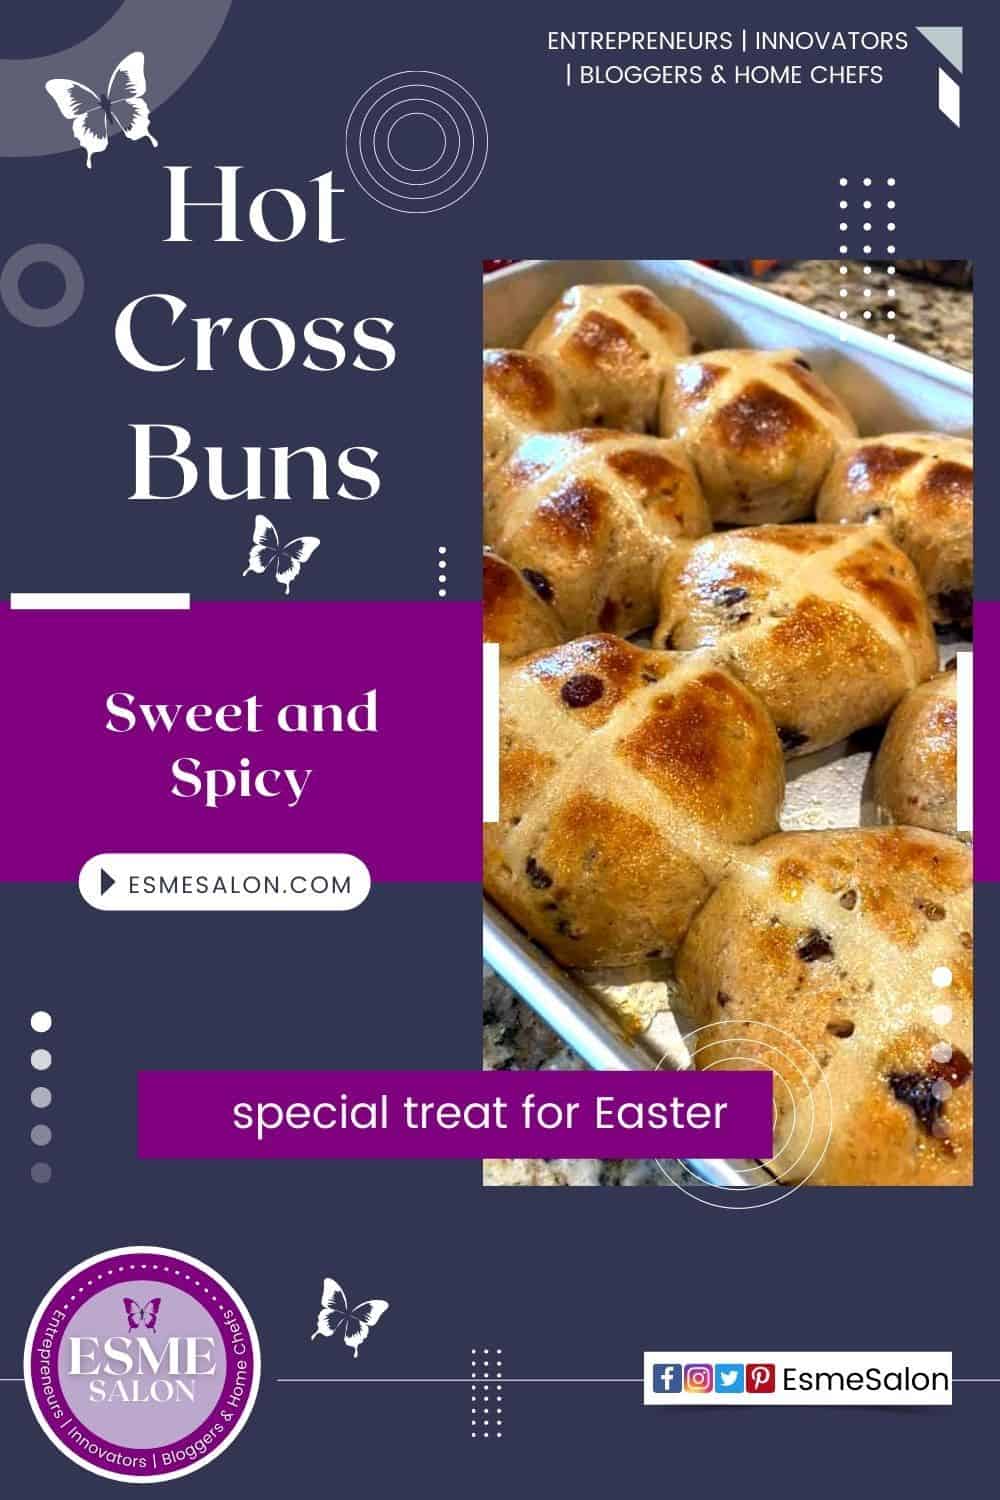 Hot Cross Buns for Easter studded with fruit in a baking tray